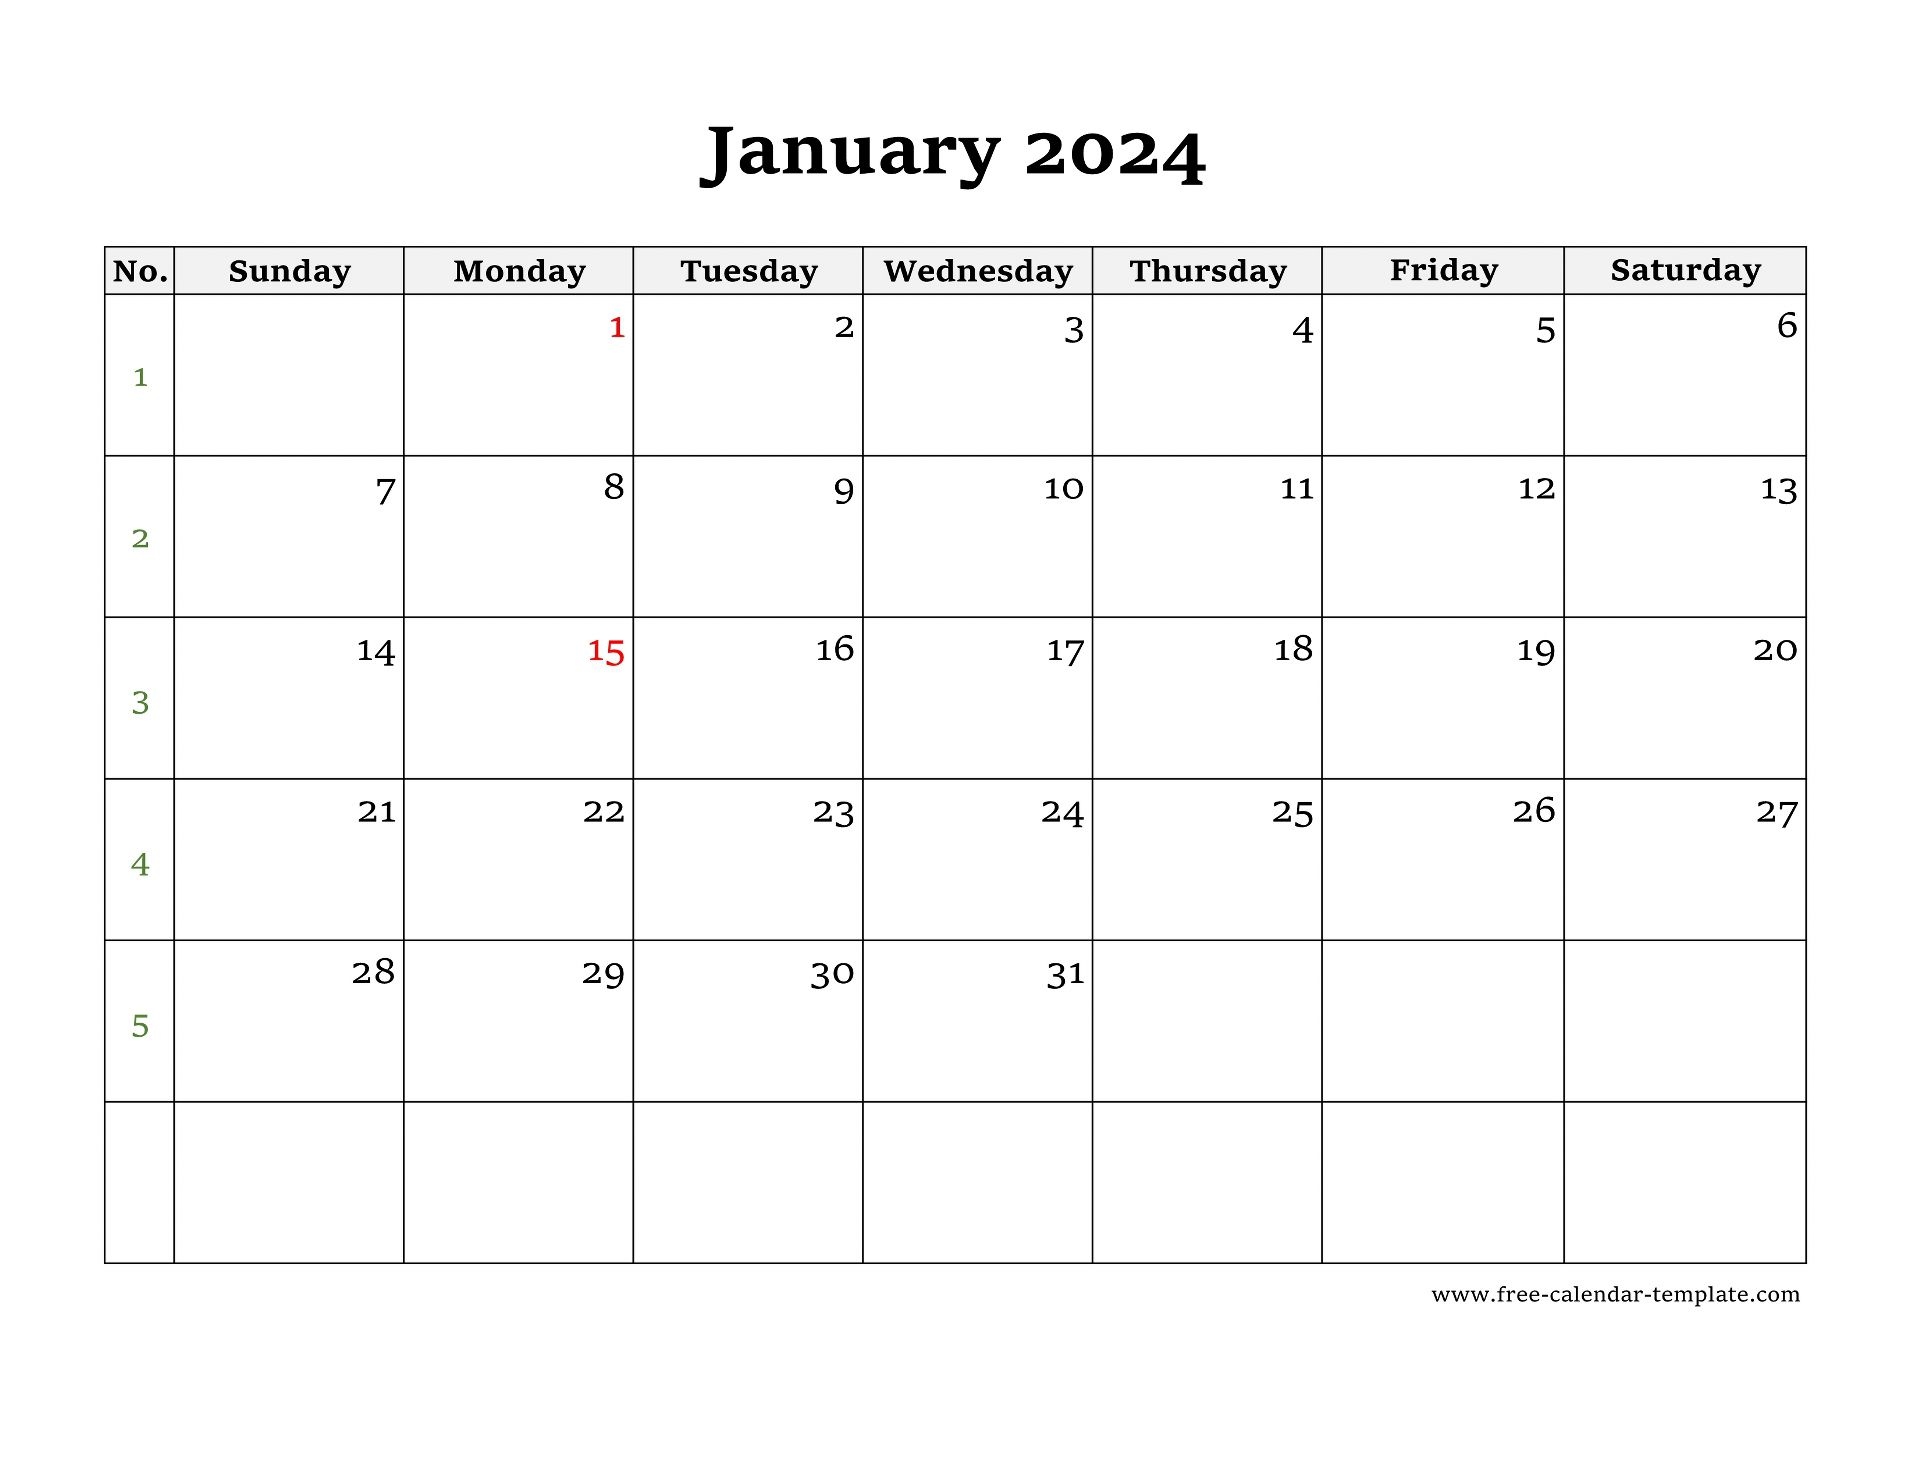 Simple Monthly Calendar 2024 Large Box On Each Day For Notes for Free Printable Calendar 2024 Big Boxes